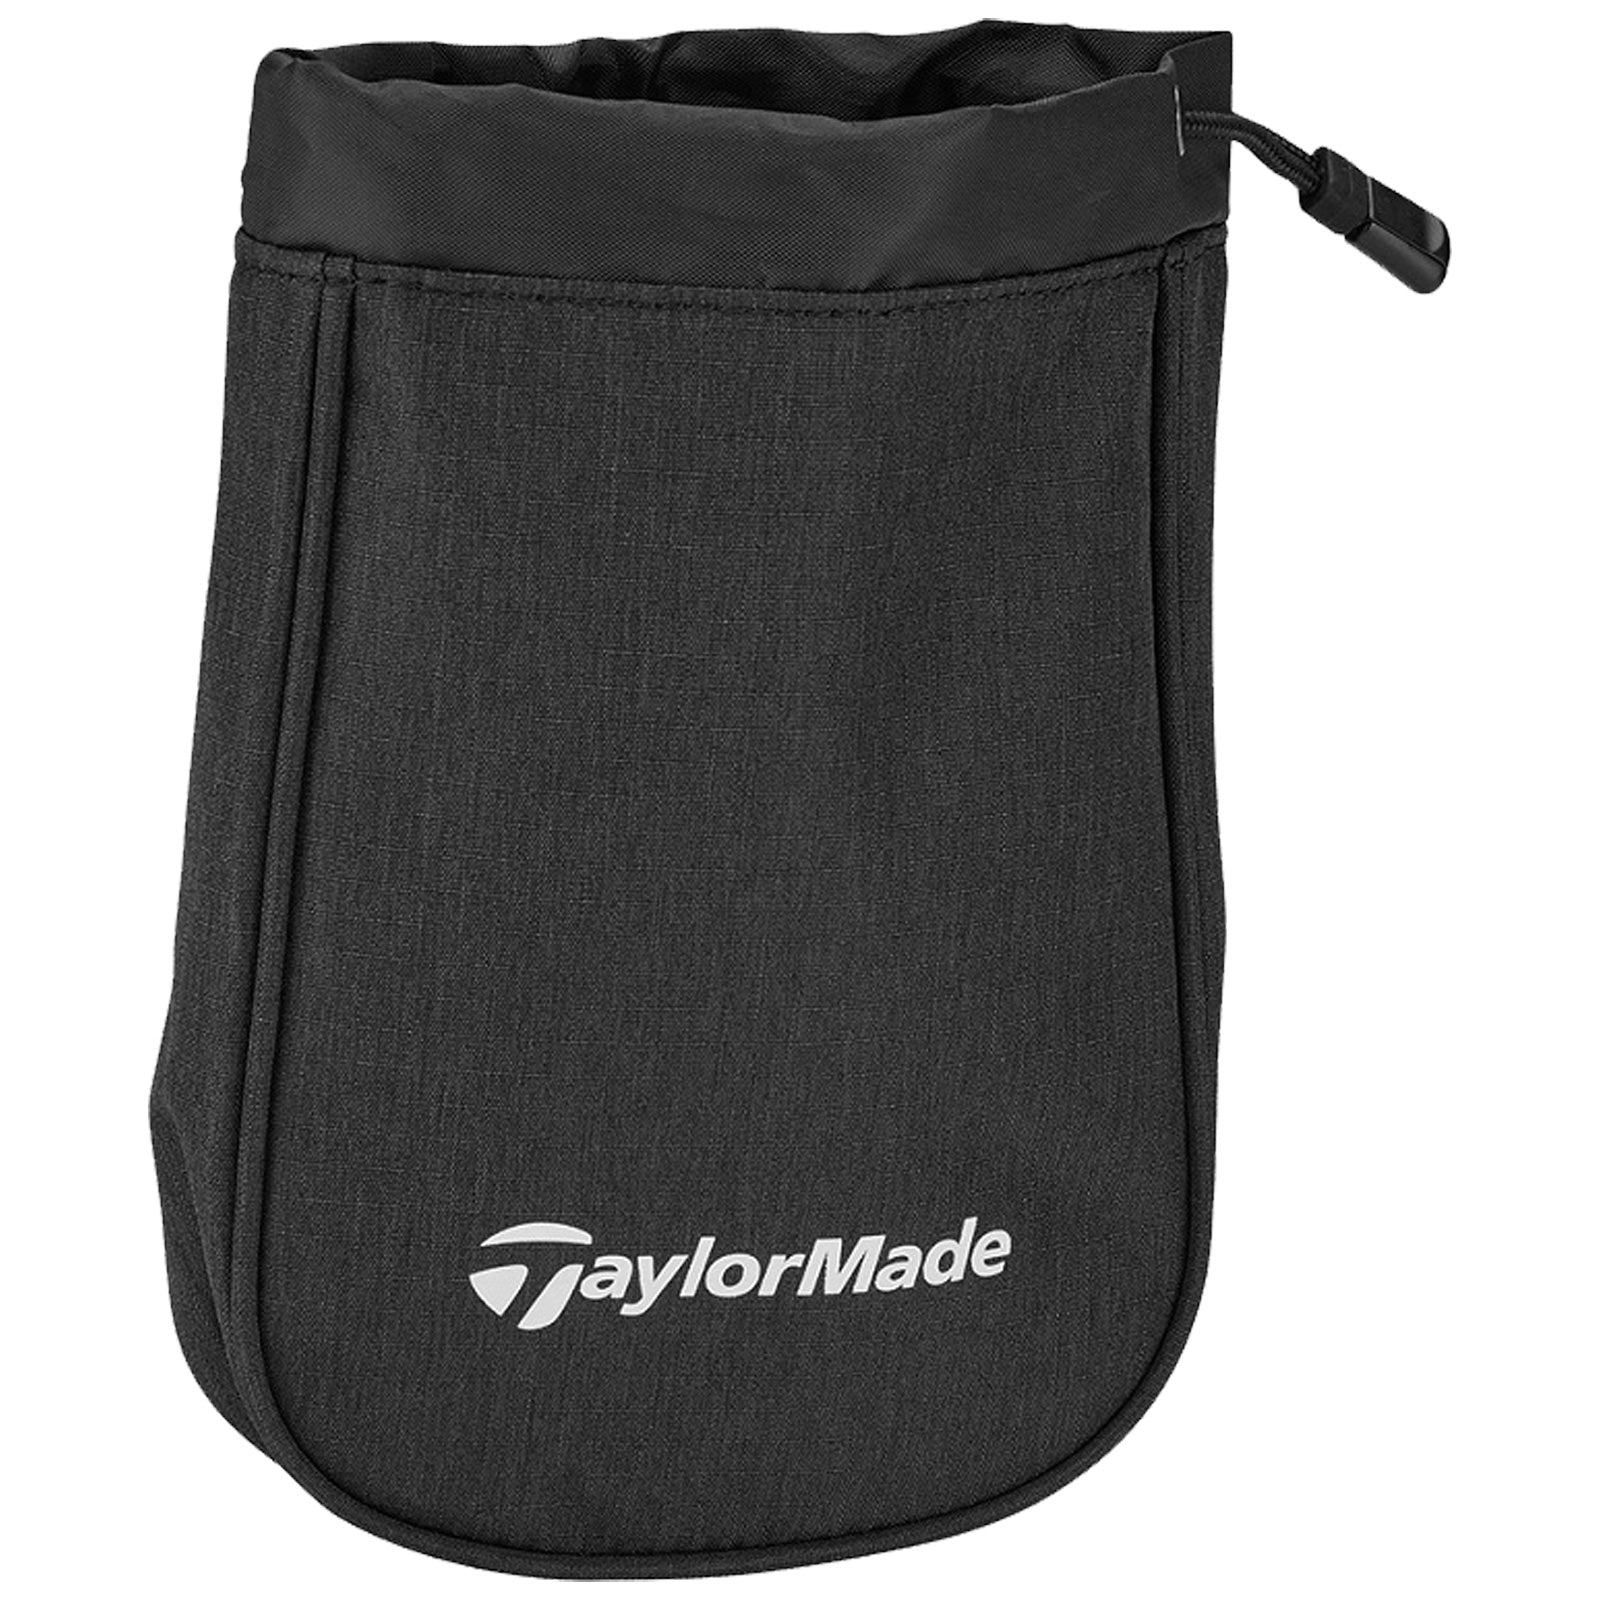 TaylorMade Performance Valuables Pouch N8949501